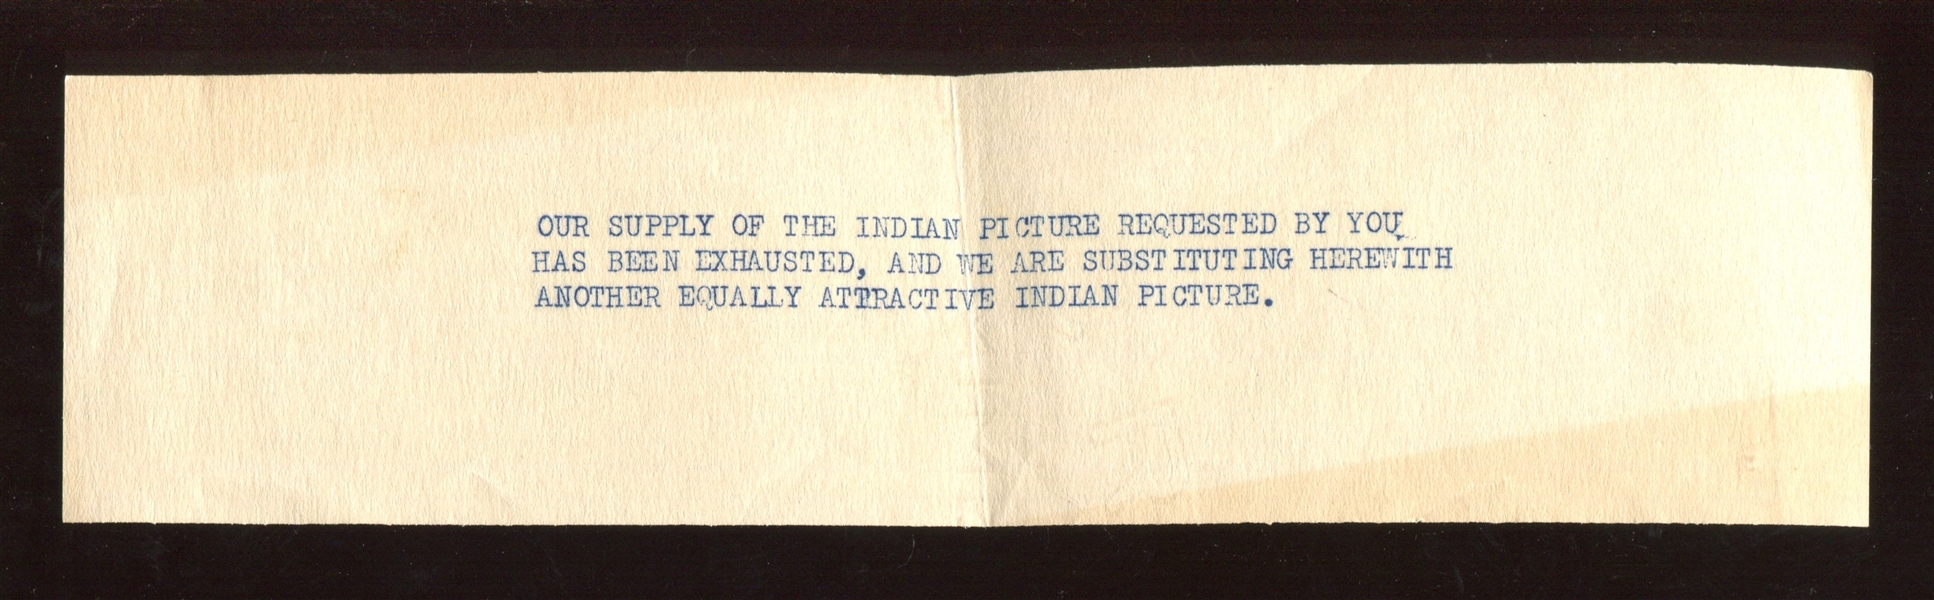 R74 Goudey Indian Gum Premium - IMPOSSIBLE Type Piece With Provenance